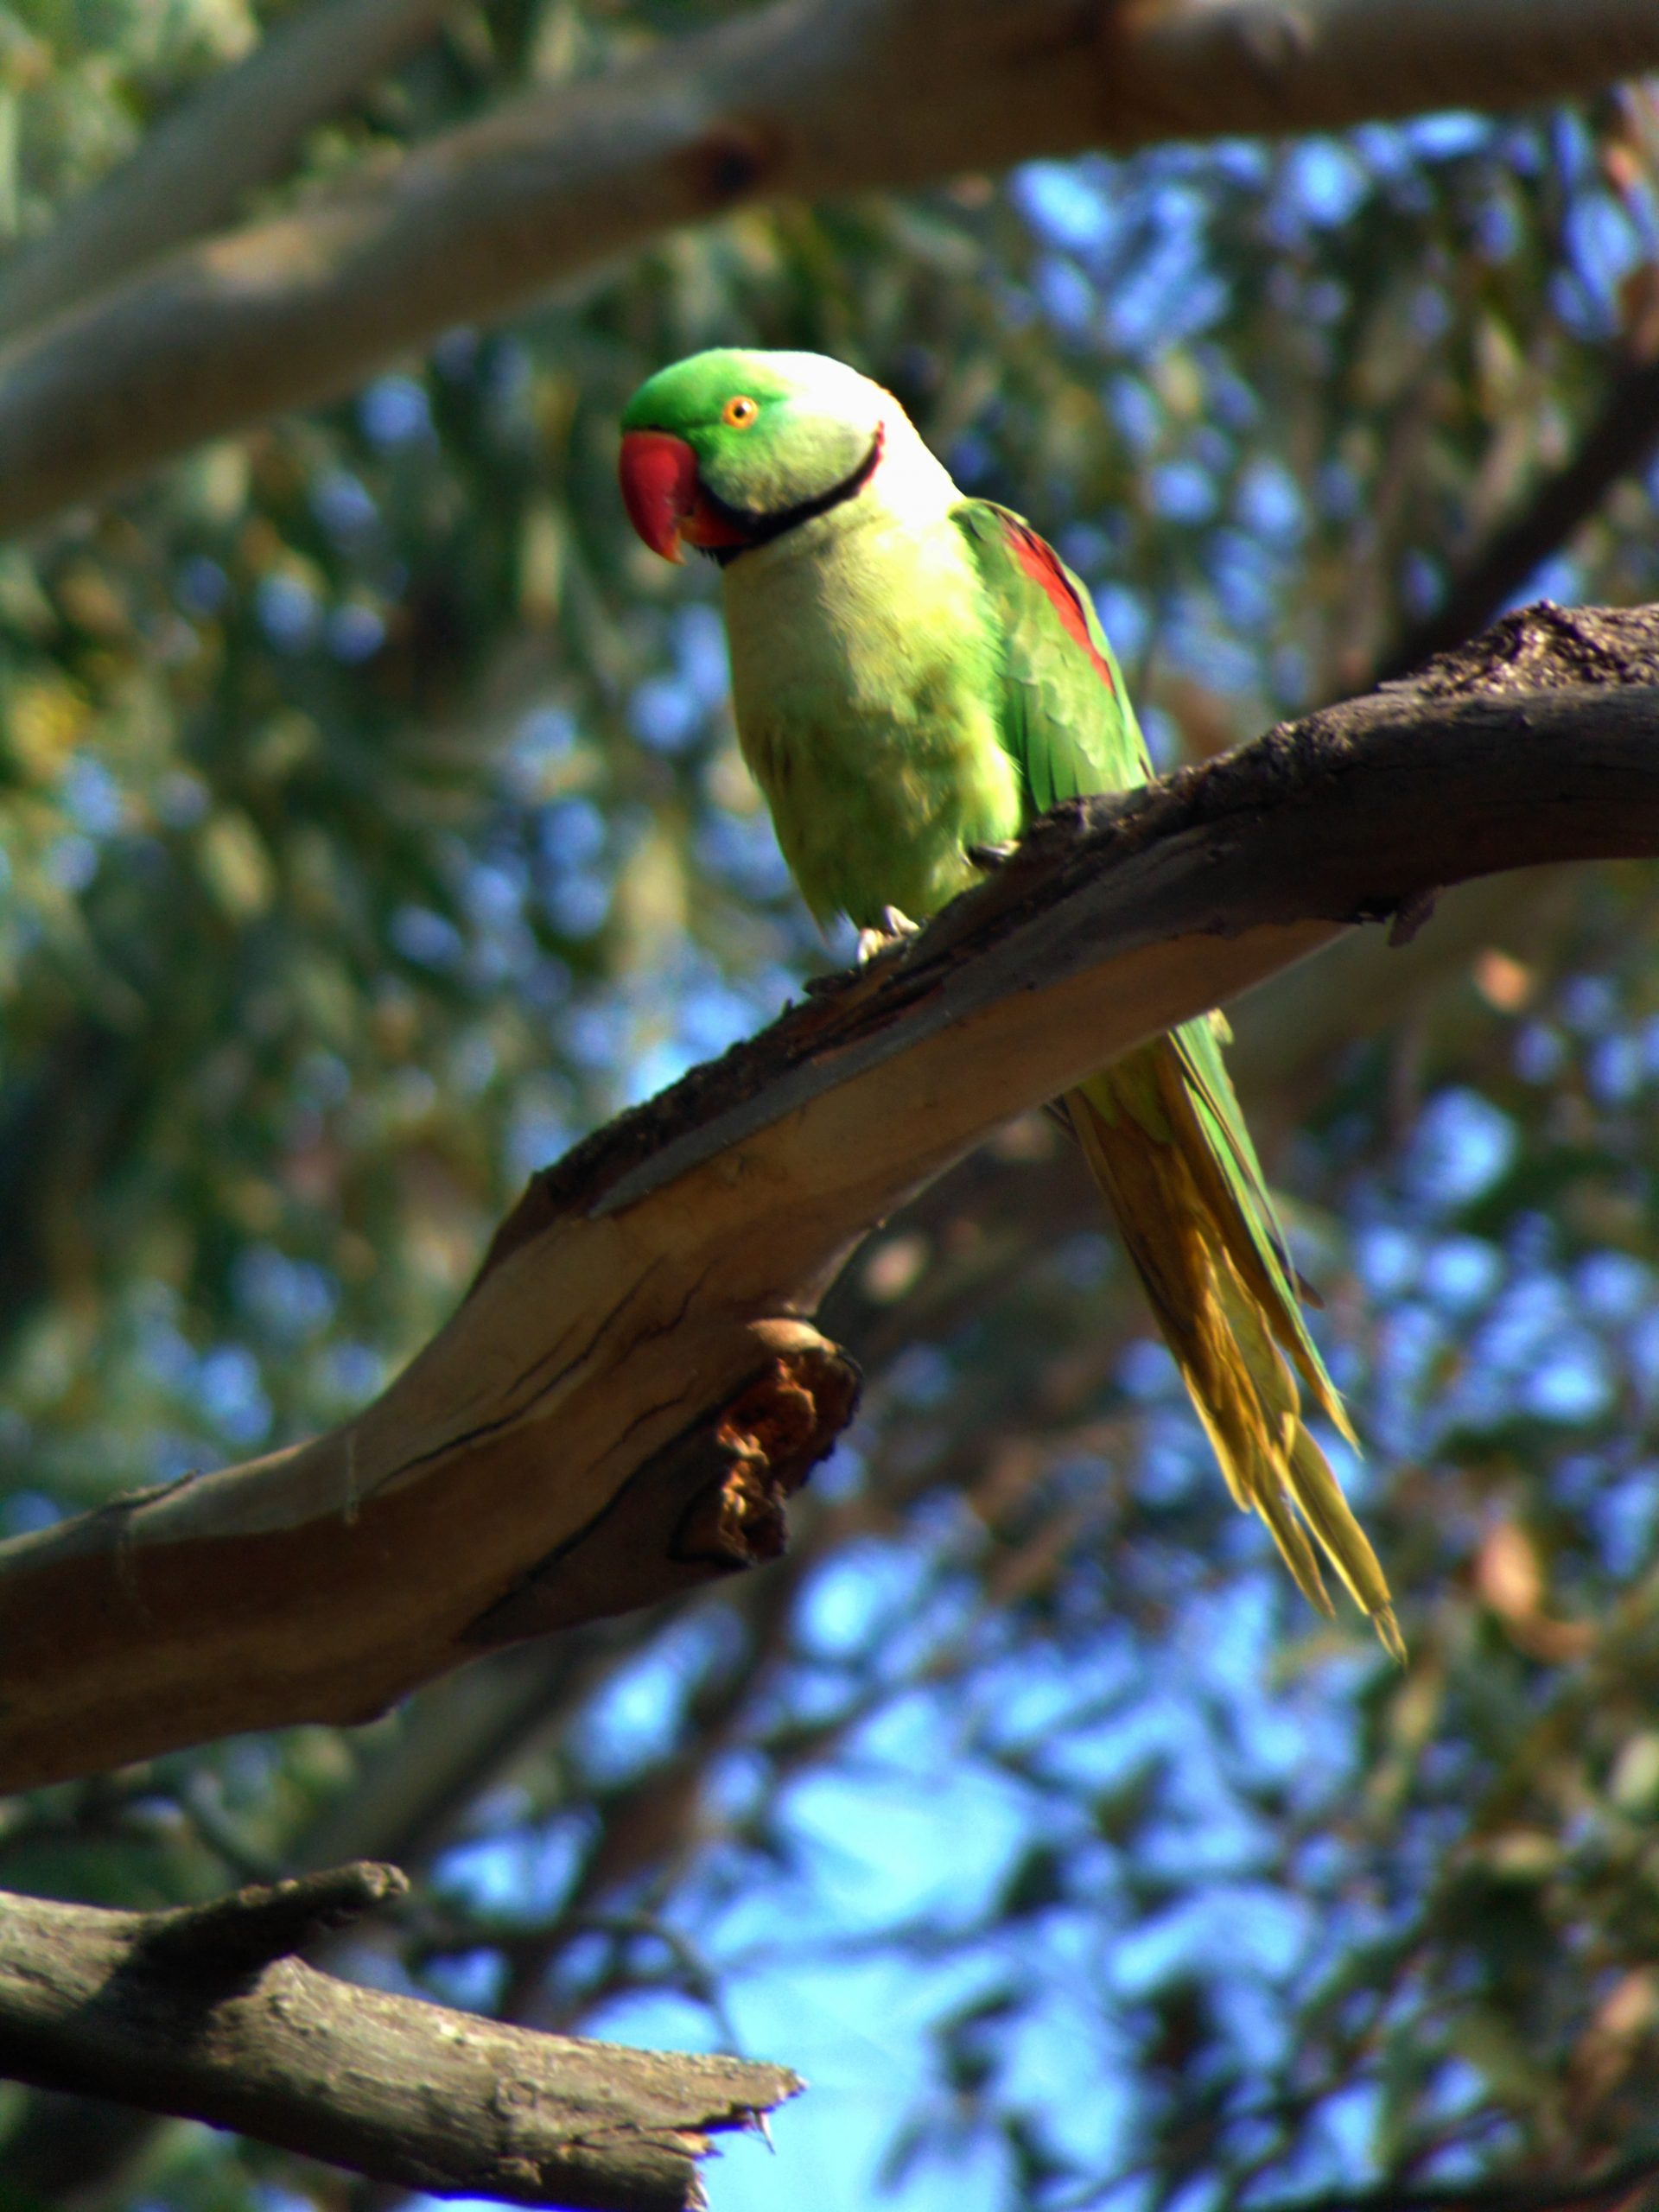 A parrot on a branch